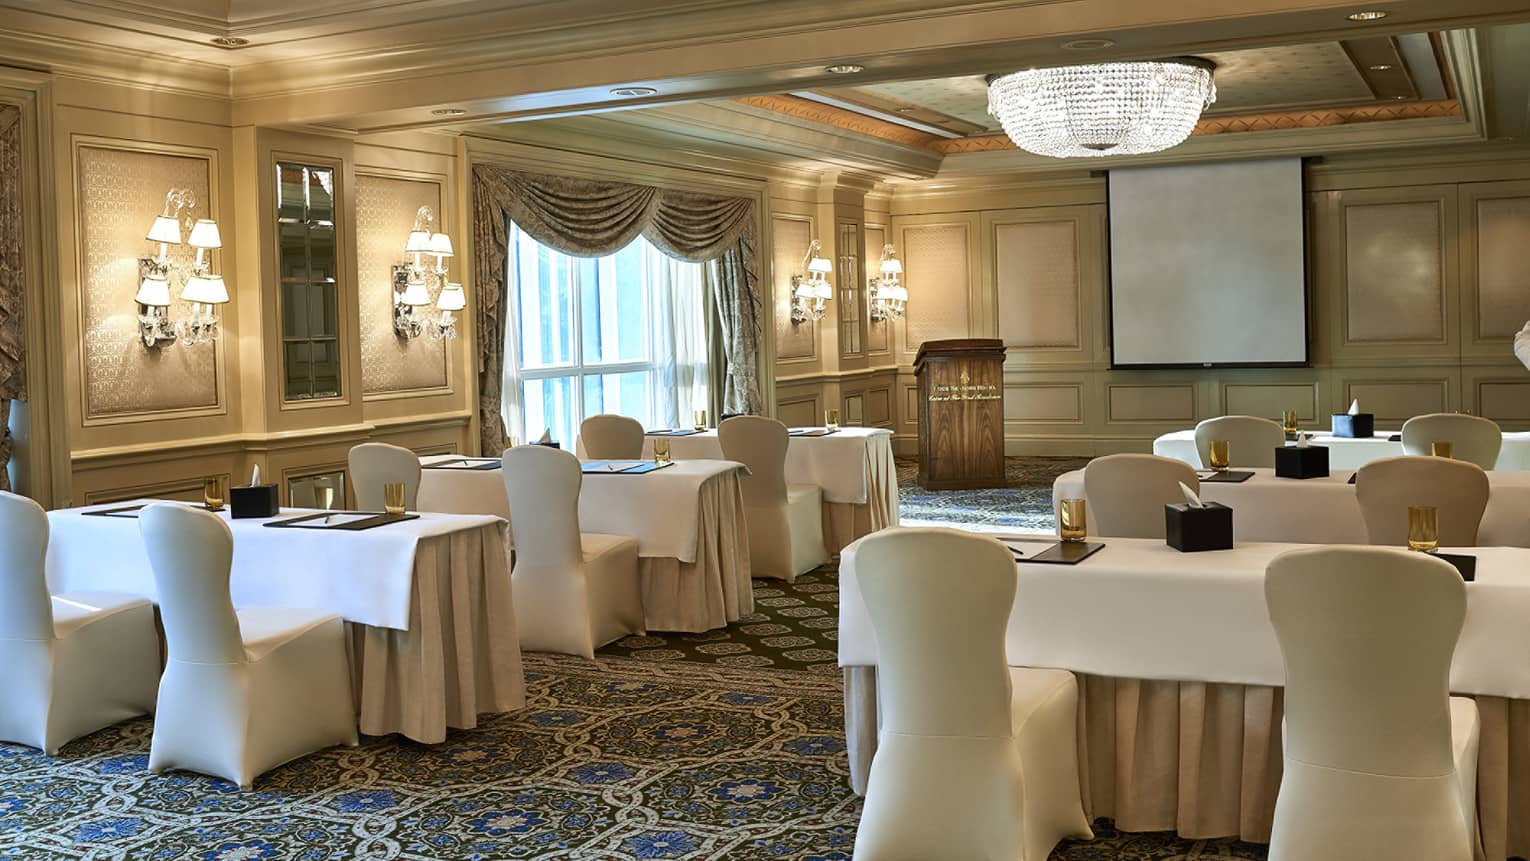 Rows of small meeting tables, chairs with white linens facing conference podium in event room